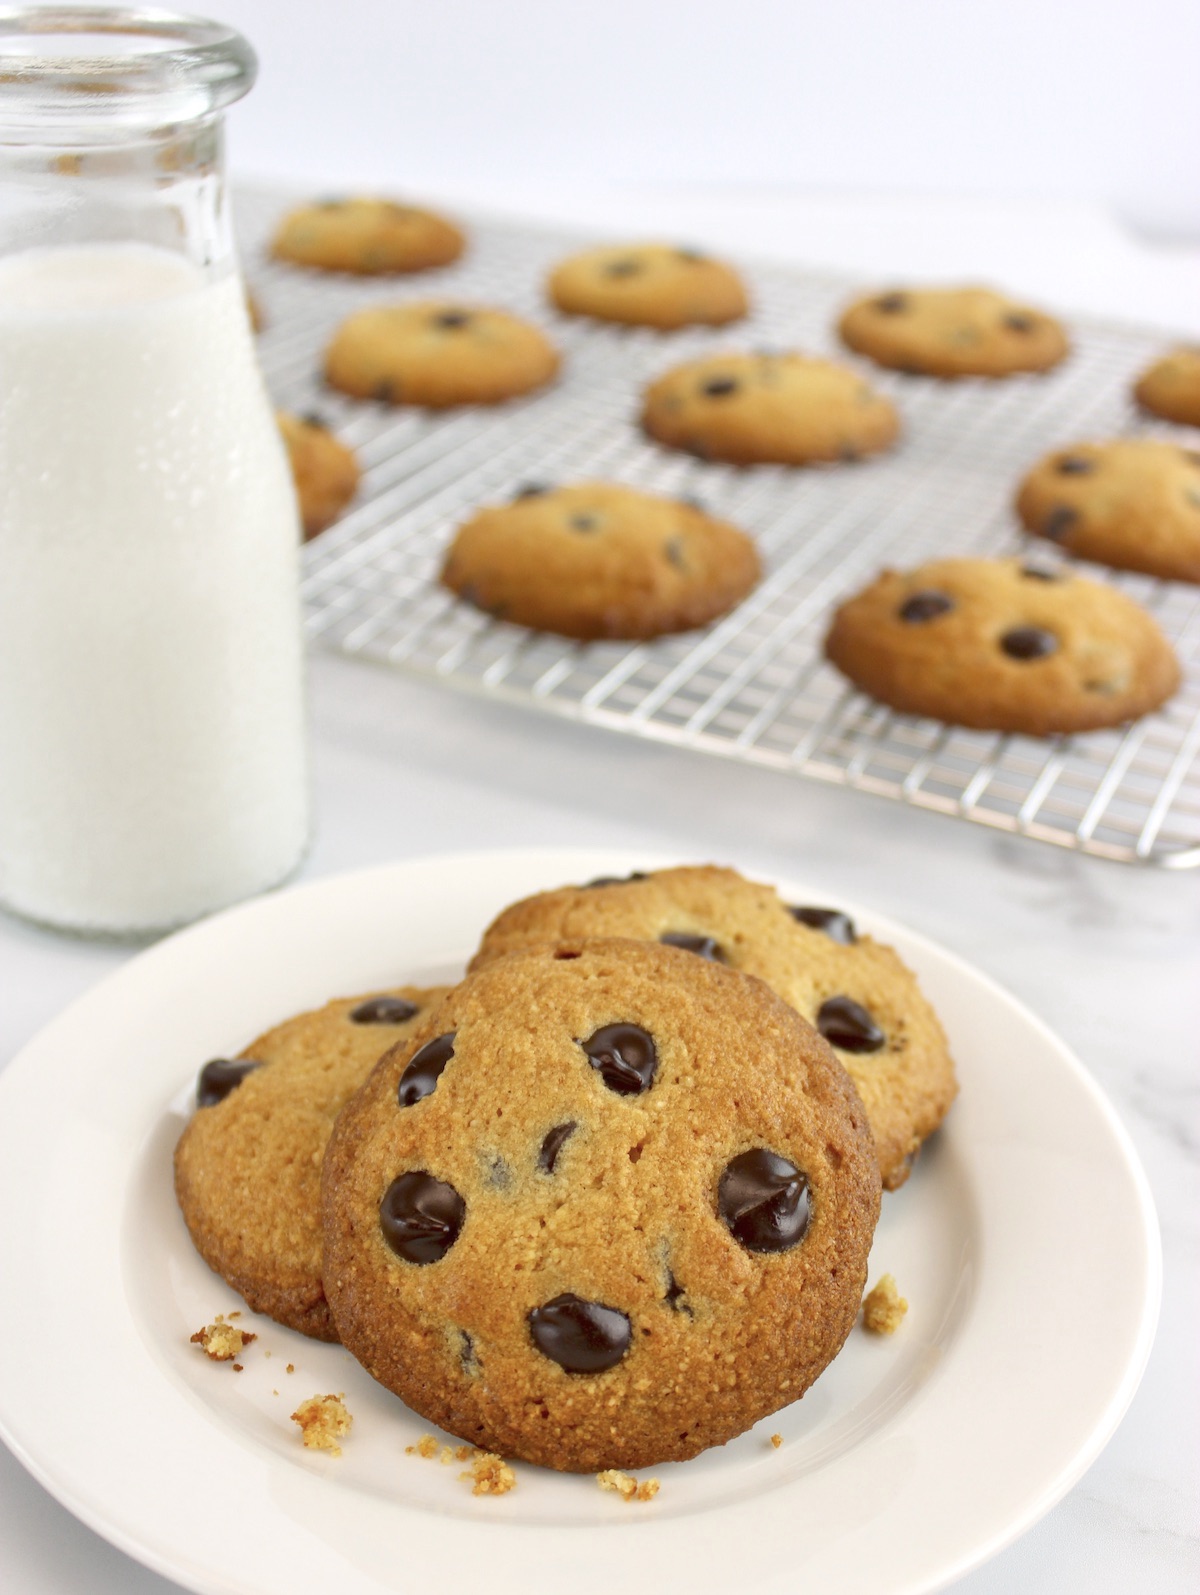 Keto Chocolate Chip Cookies on white plate with milk bottle and more cookies on cooling rack i background